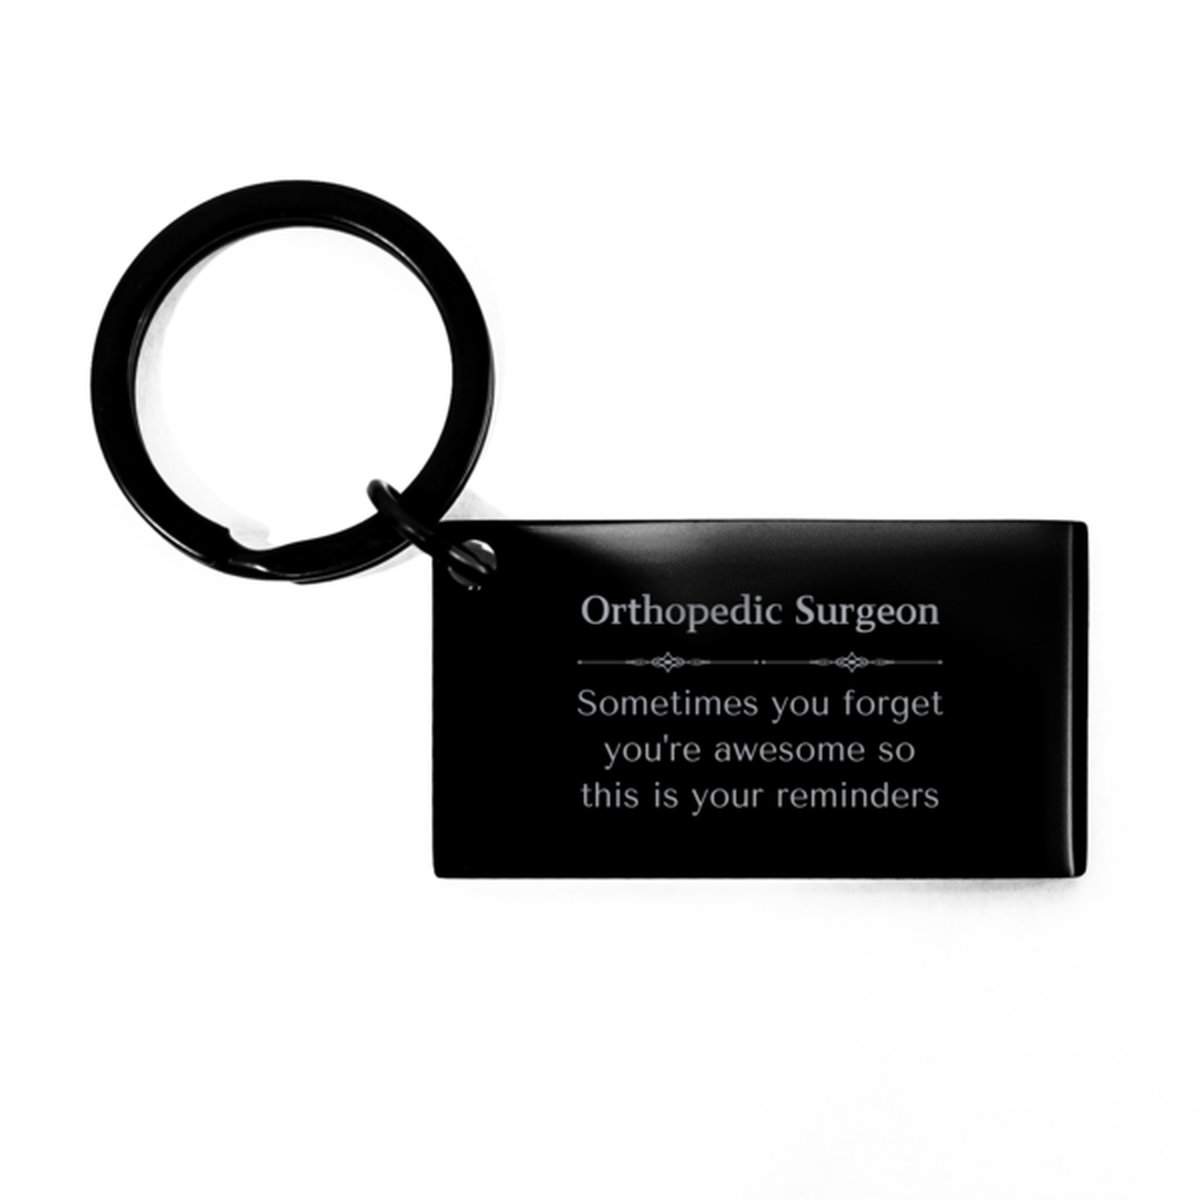 Sentimental Orthopedic Surgeon Keychain, President Sometimes you forget you're awesome so this is your reminders, Graduation Christmas Birthday Gifts for Orthopedic Surgeon, Men, Women, Coworkers